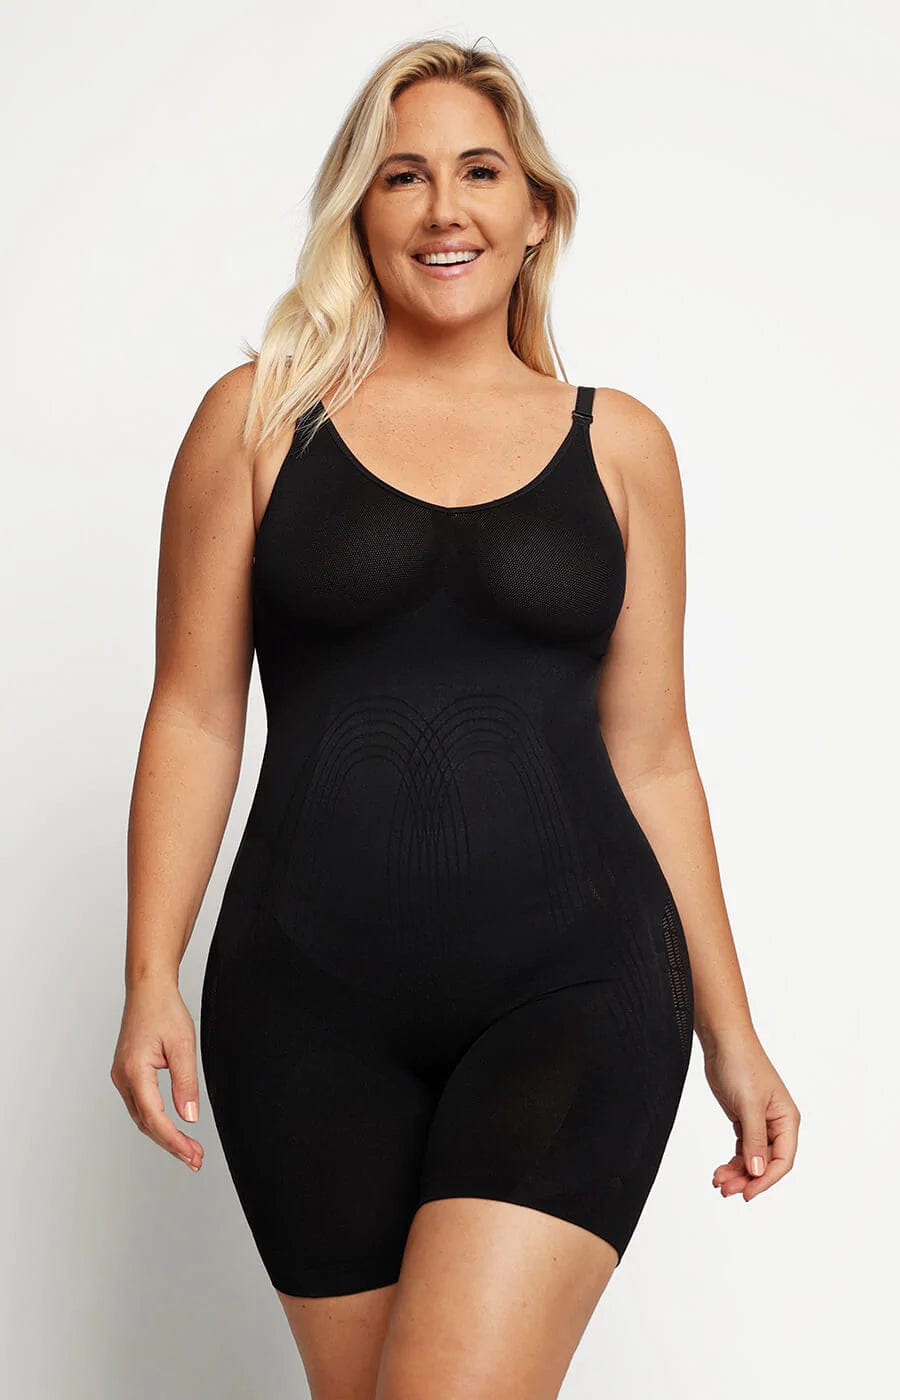 Hourglass Full Body Shaper S-2xl in Pokuase - Clothing Accessories